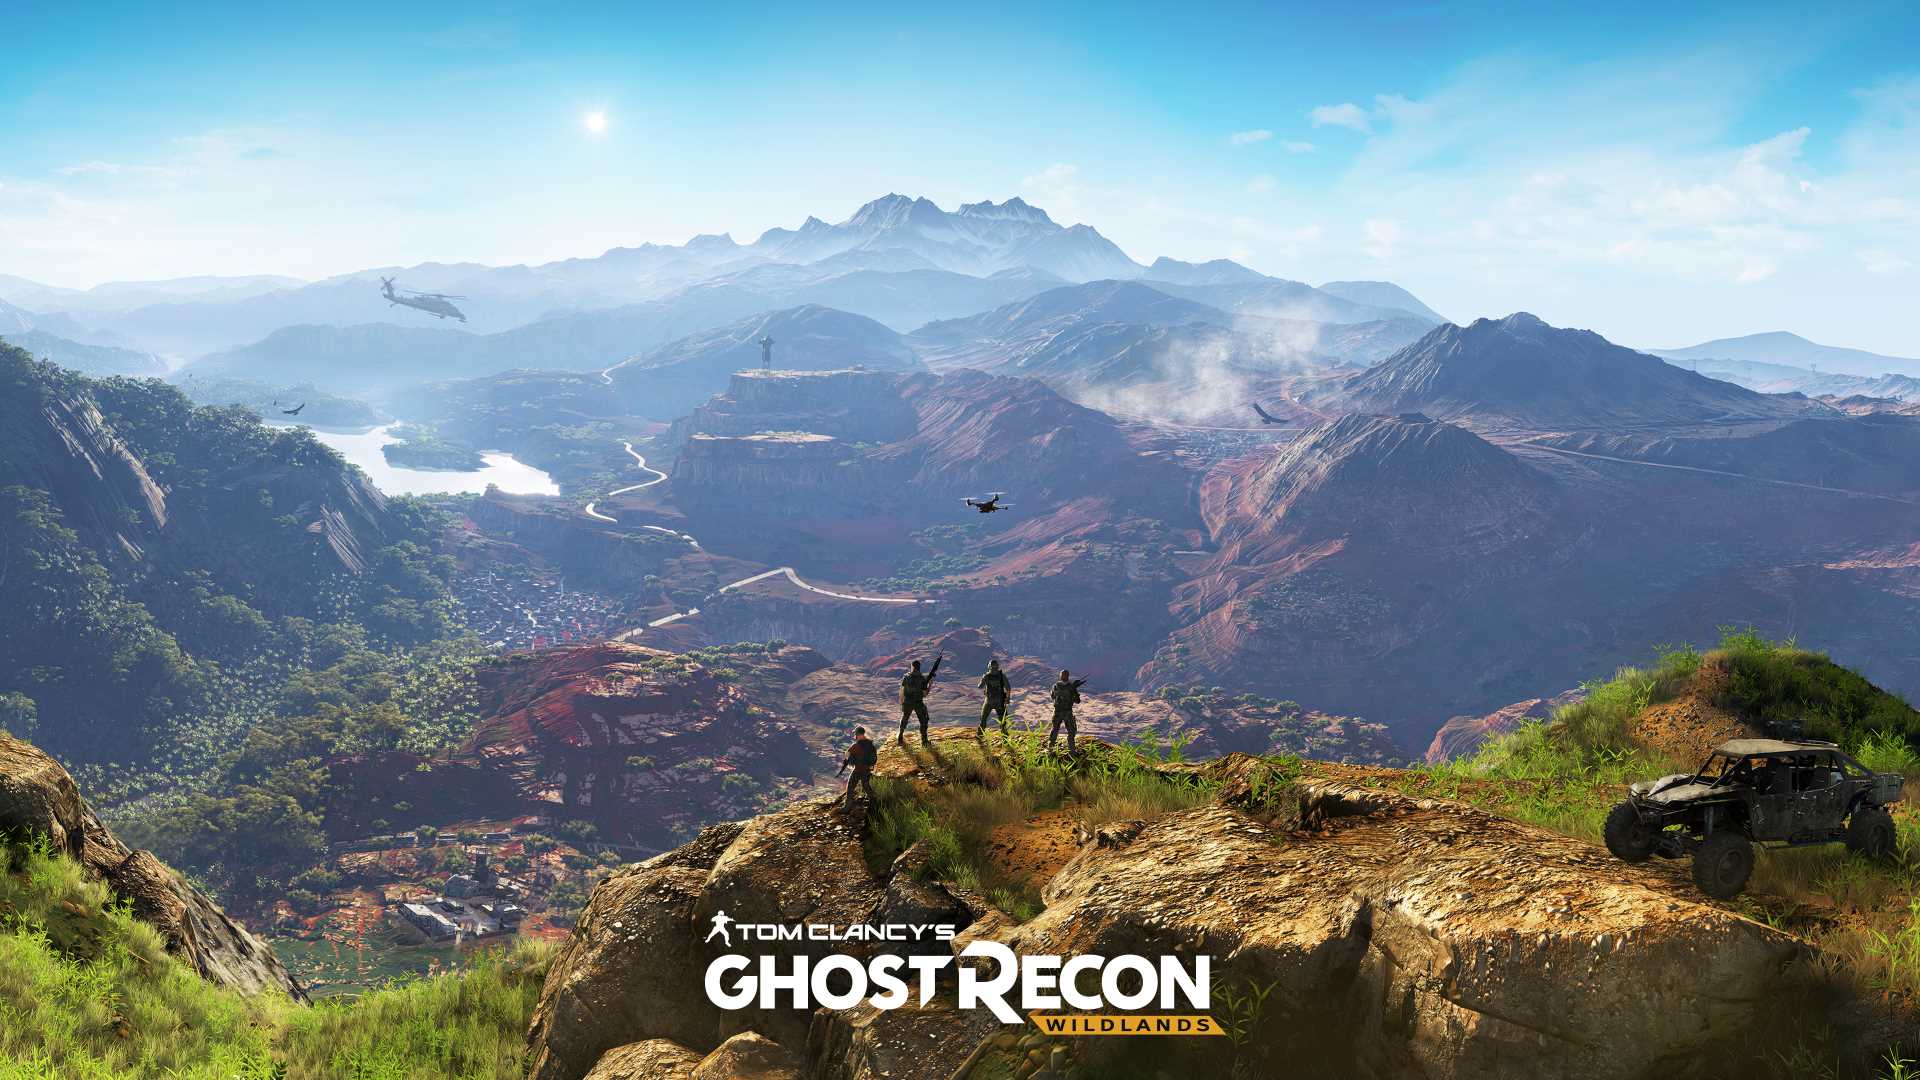 tom clancy ghost recon rating